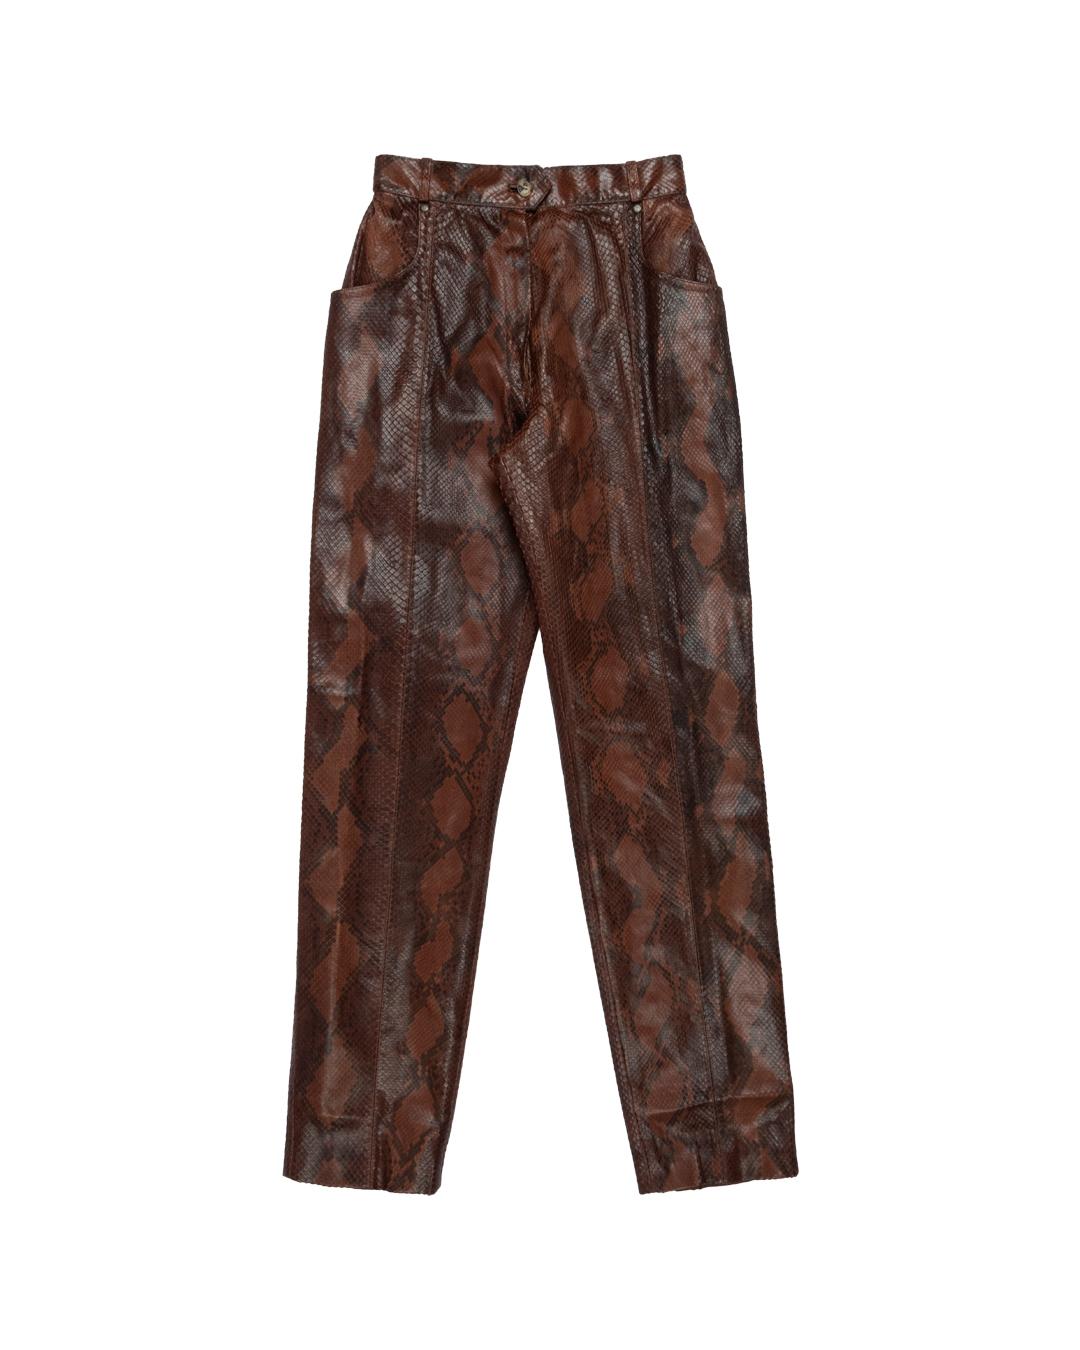 Hermes Sample Python Leather Trousers For Sale 1